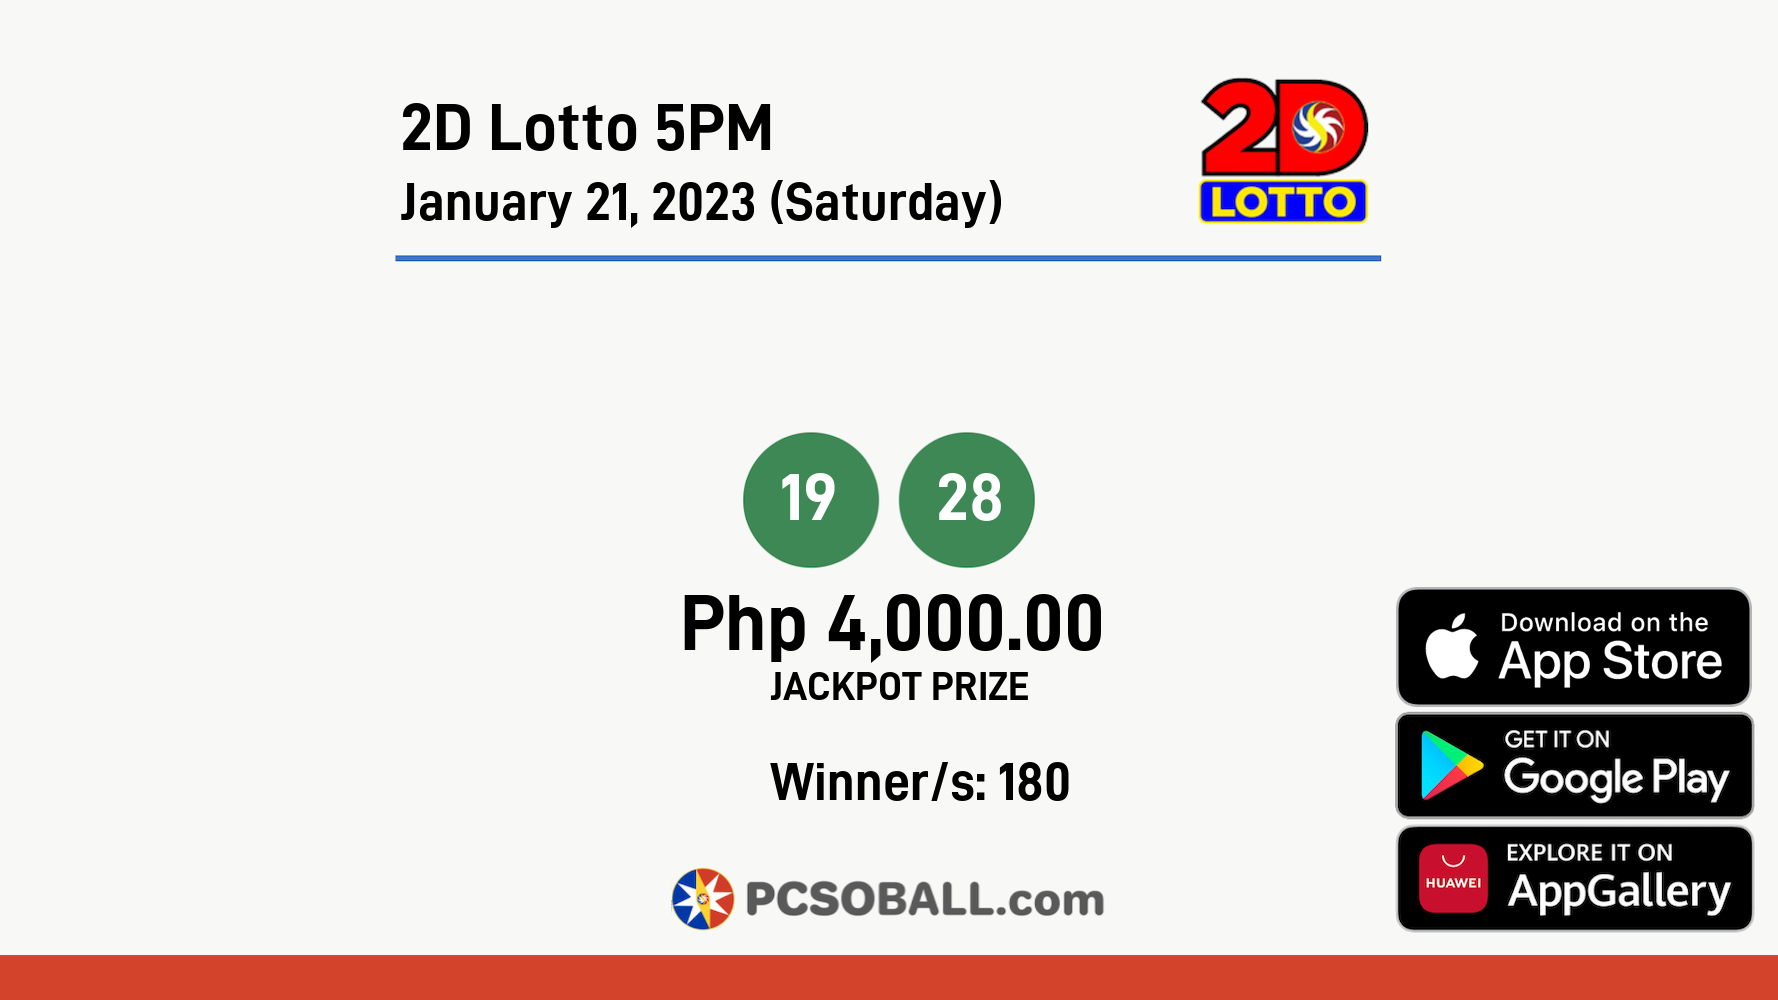 2D Lotto 5PM January 21, 2023 (Saturday) Result